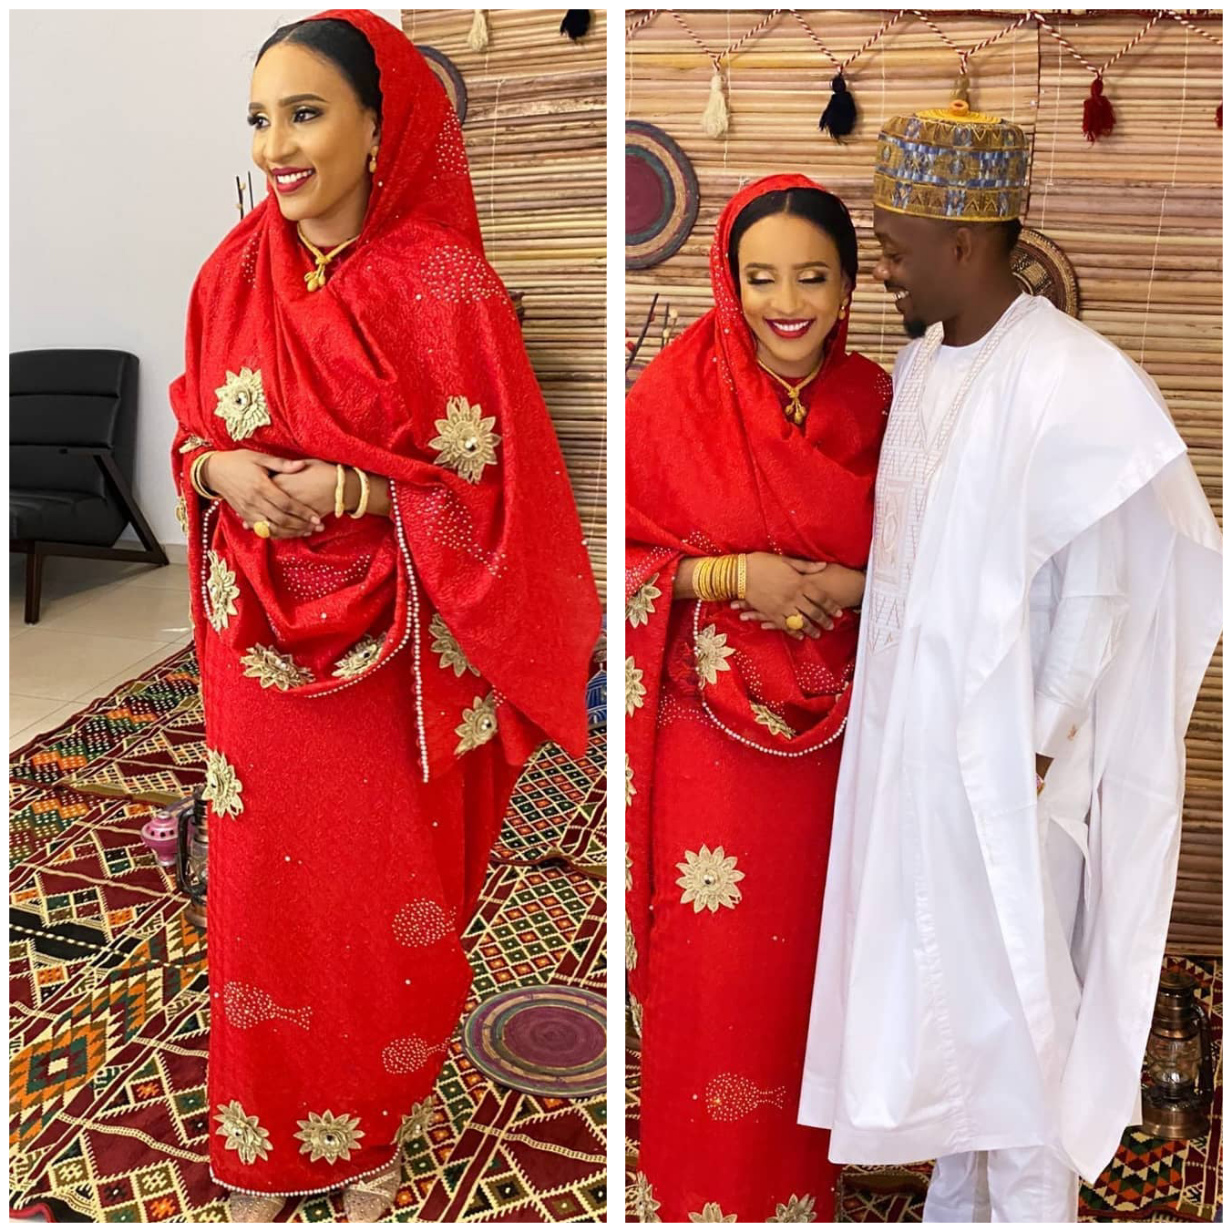 More photos of Ahmed Musa and his new wife, Maryam Jajere 